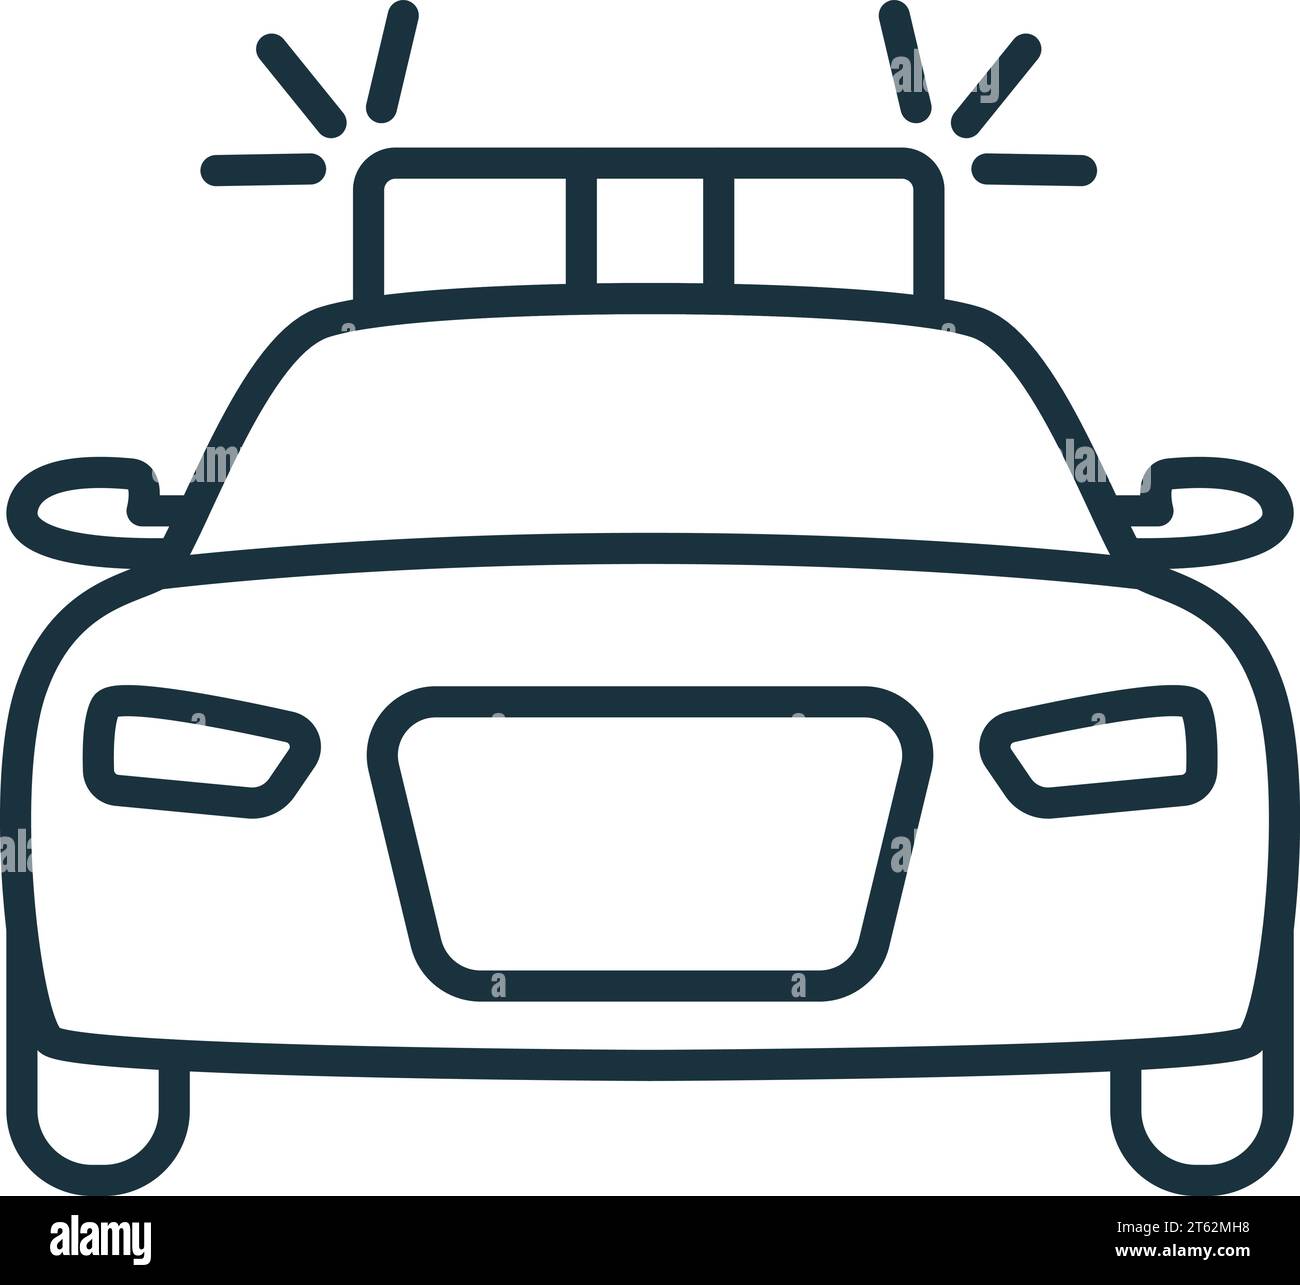 Police car outline icon. Monochrome simple sign from transportation collection. Police car icon for logo, templates, web design and infographics. Stock Vector